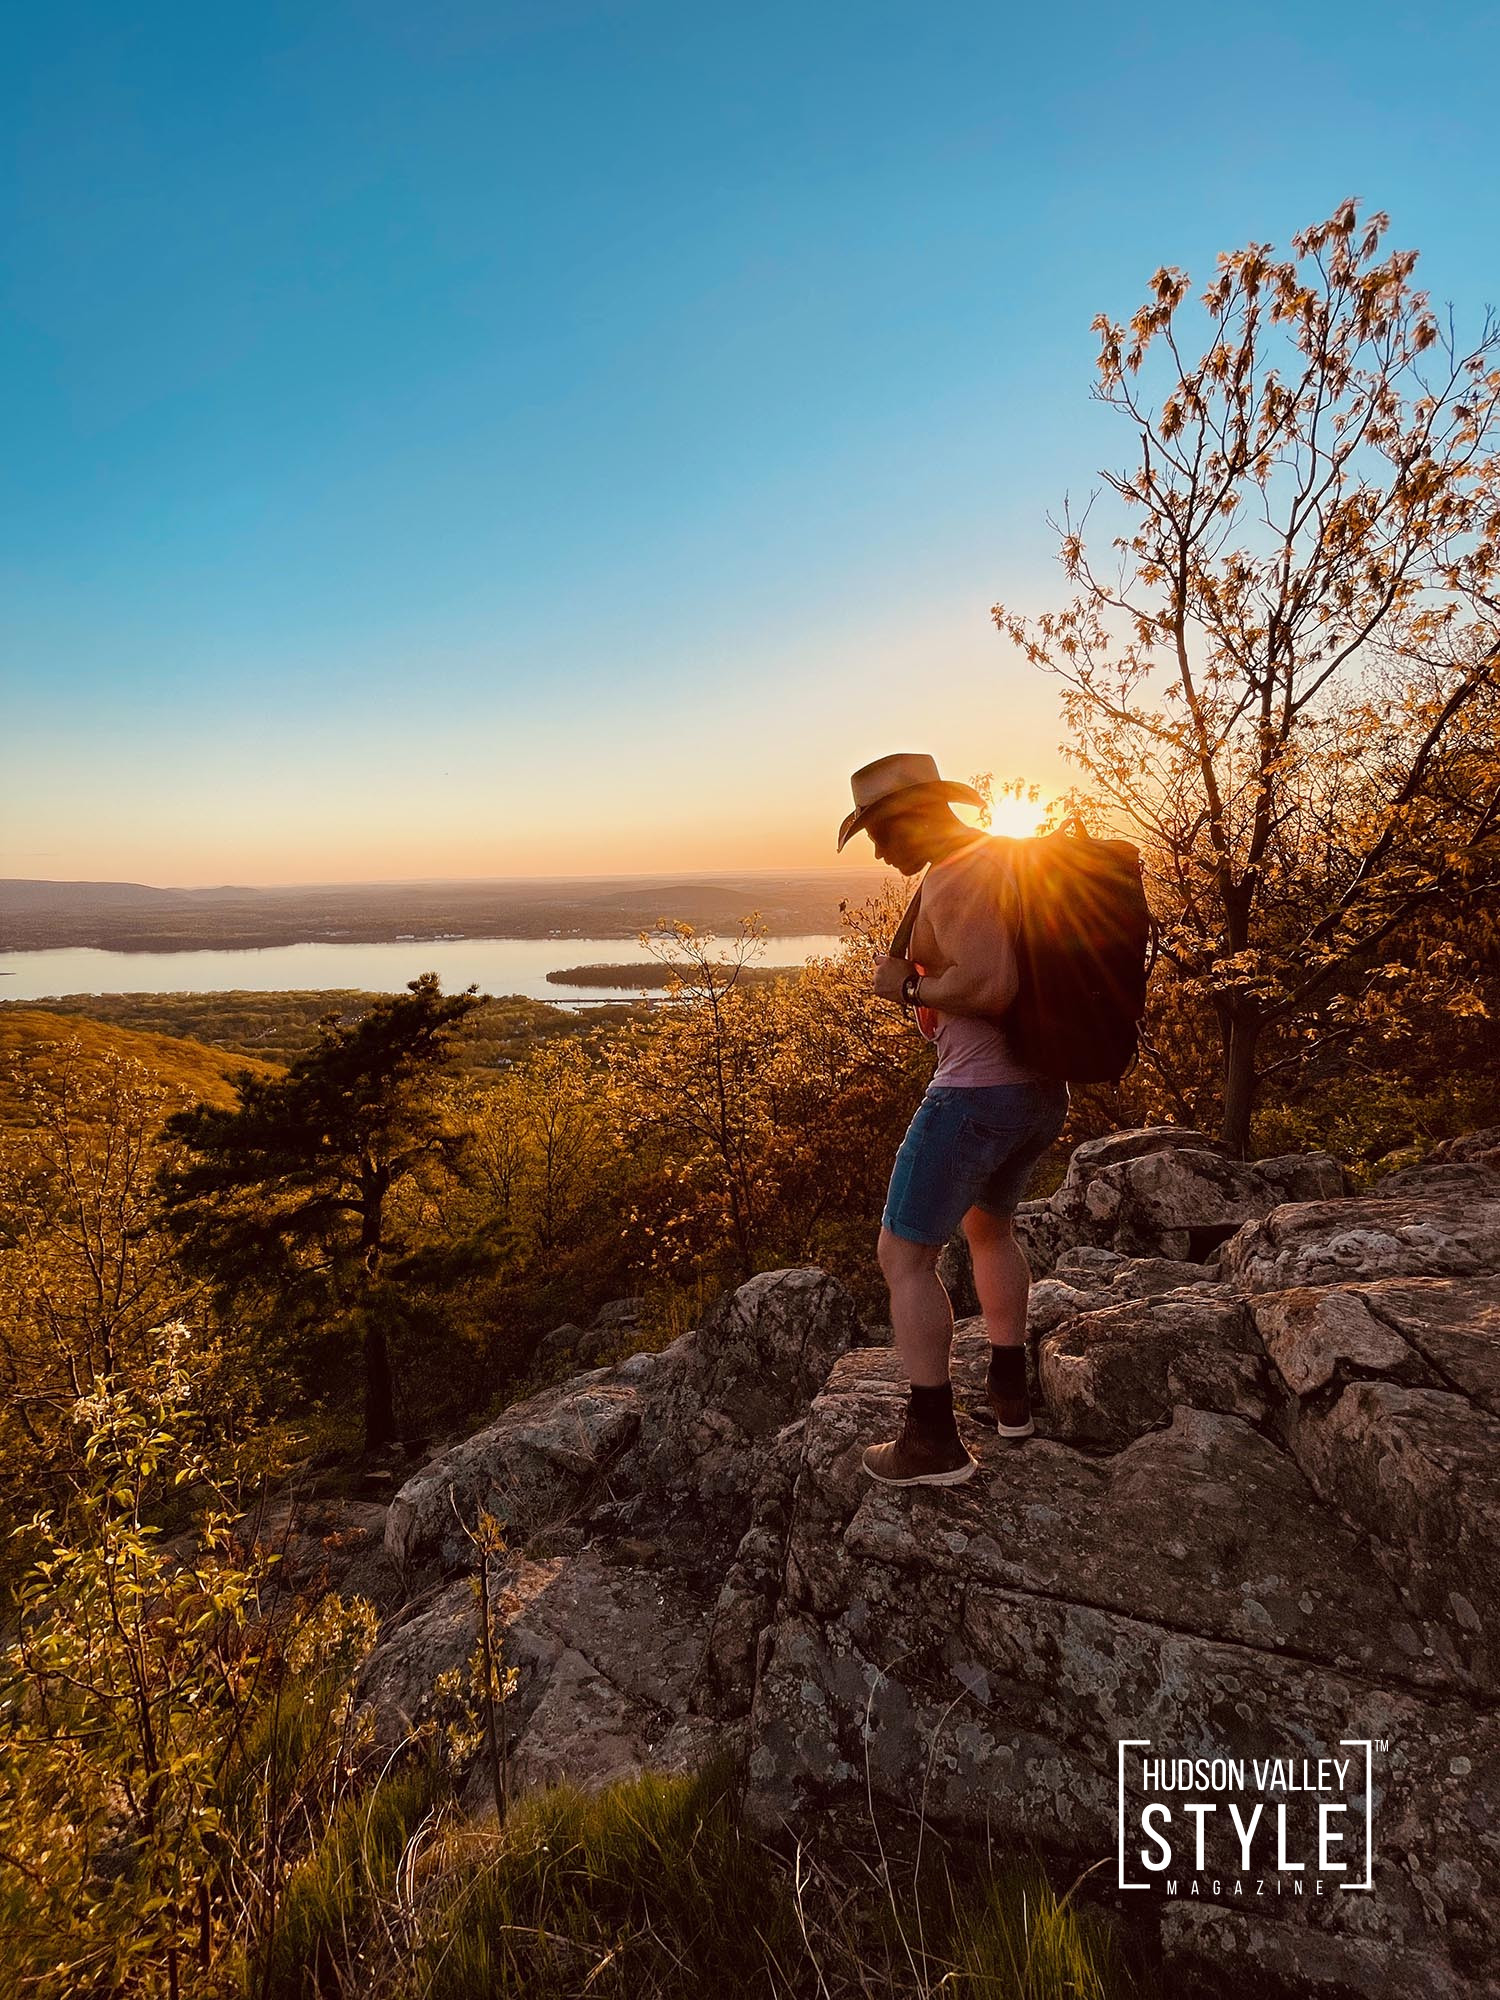 Backpacking in the Hudson Valley: Don't Forget to Bring a Natural Bug Repellent – Hudson Valley hiking adventures with Coach, Photographer and Fitness Model Maxwell Alexander – Presented by DA Aromatherapy Natural Bug Repellents